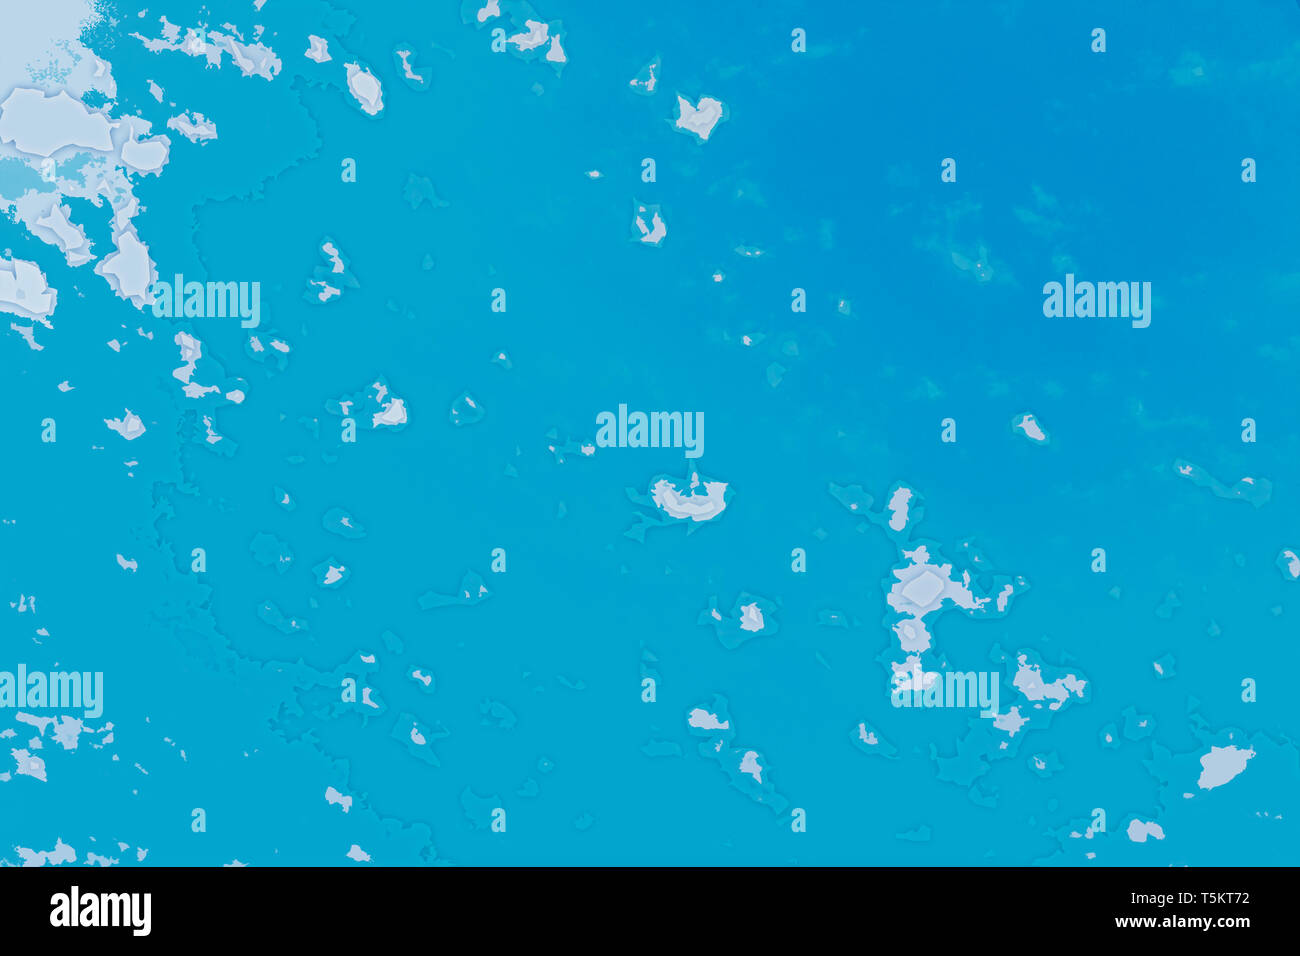 White, blue and cyan background texture. Abstract map with north ...